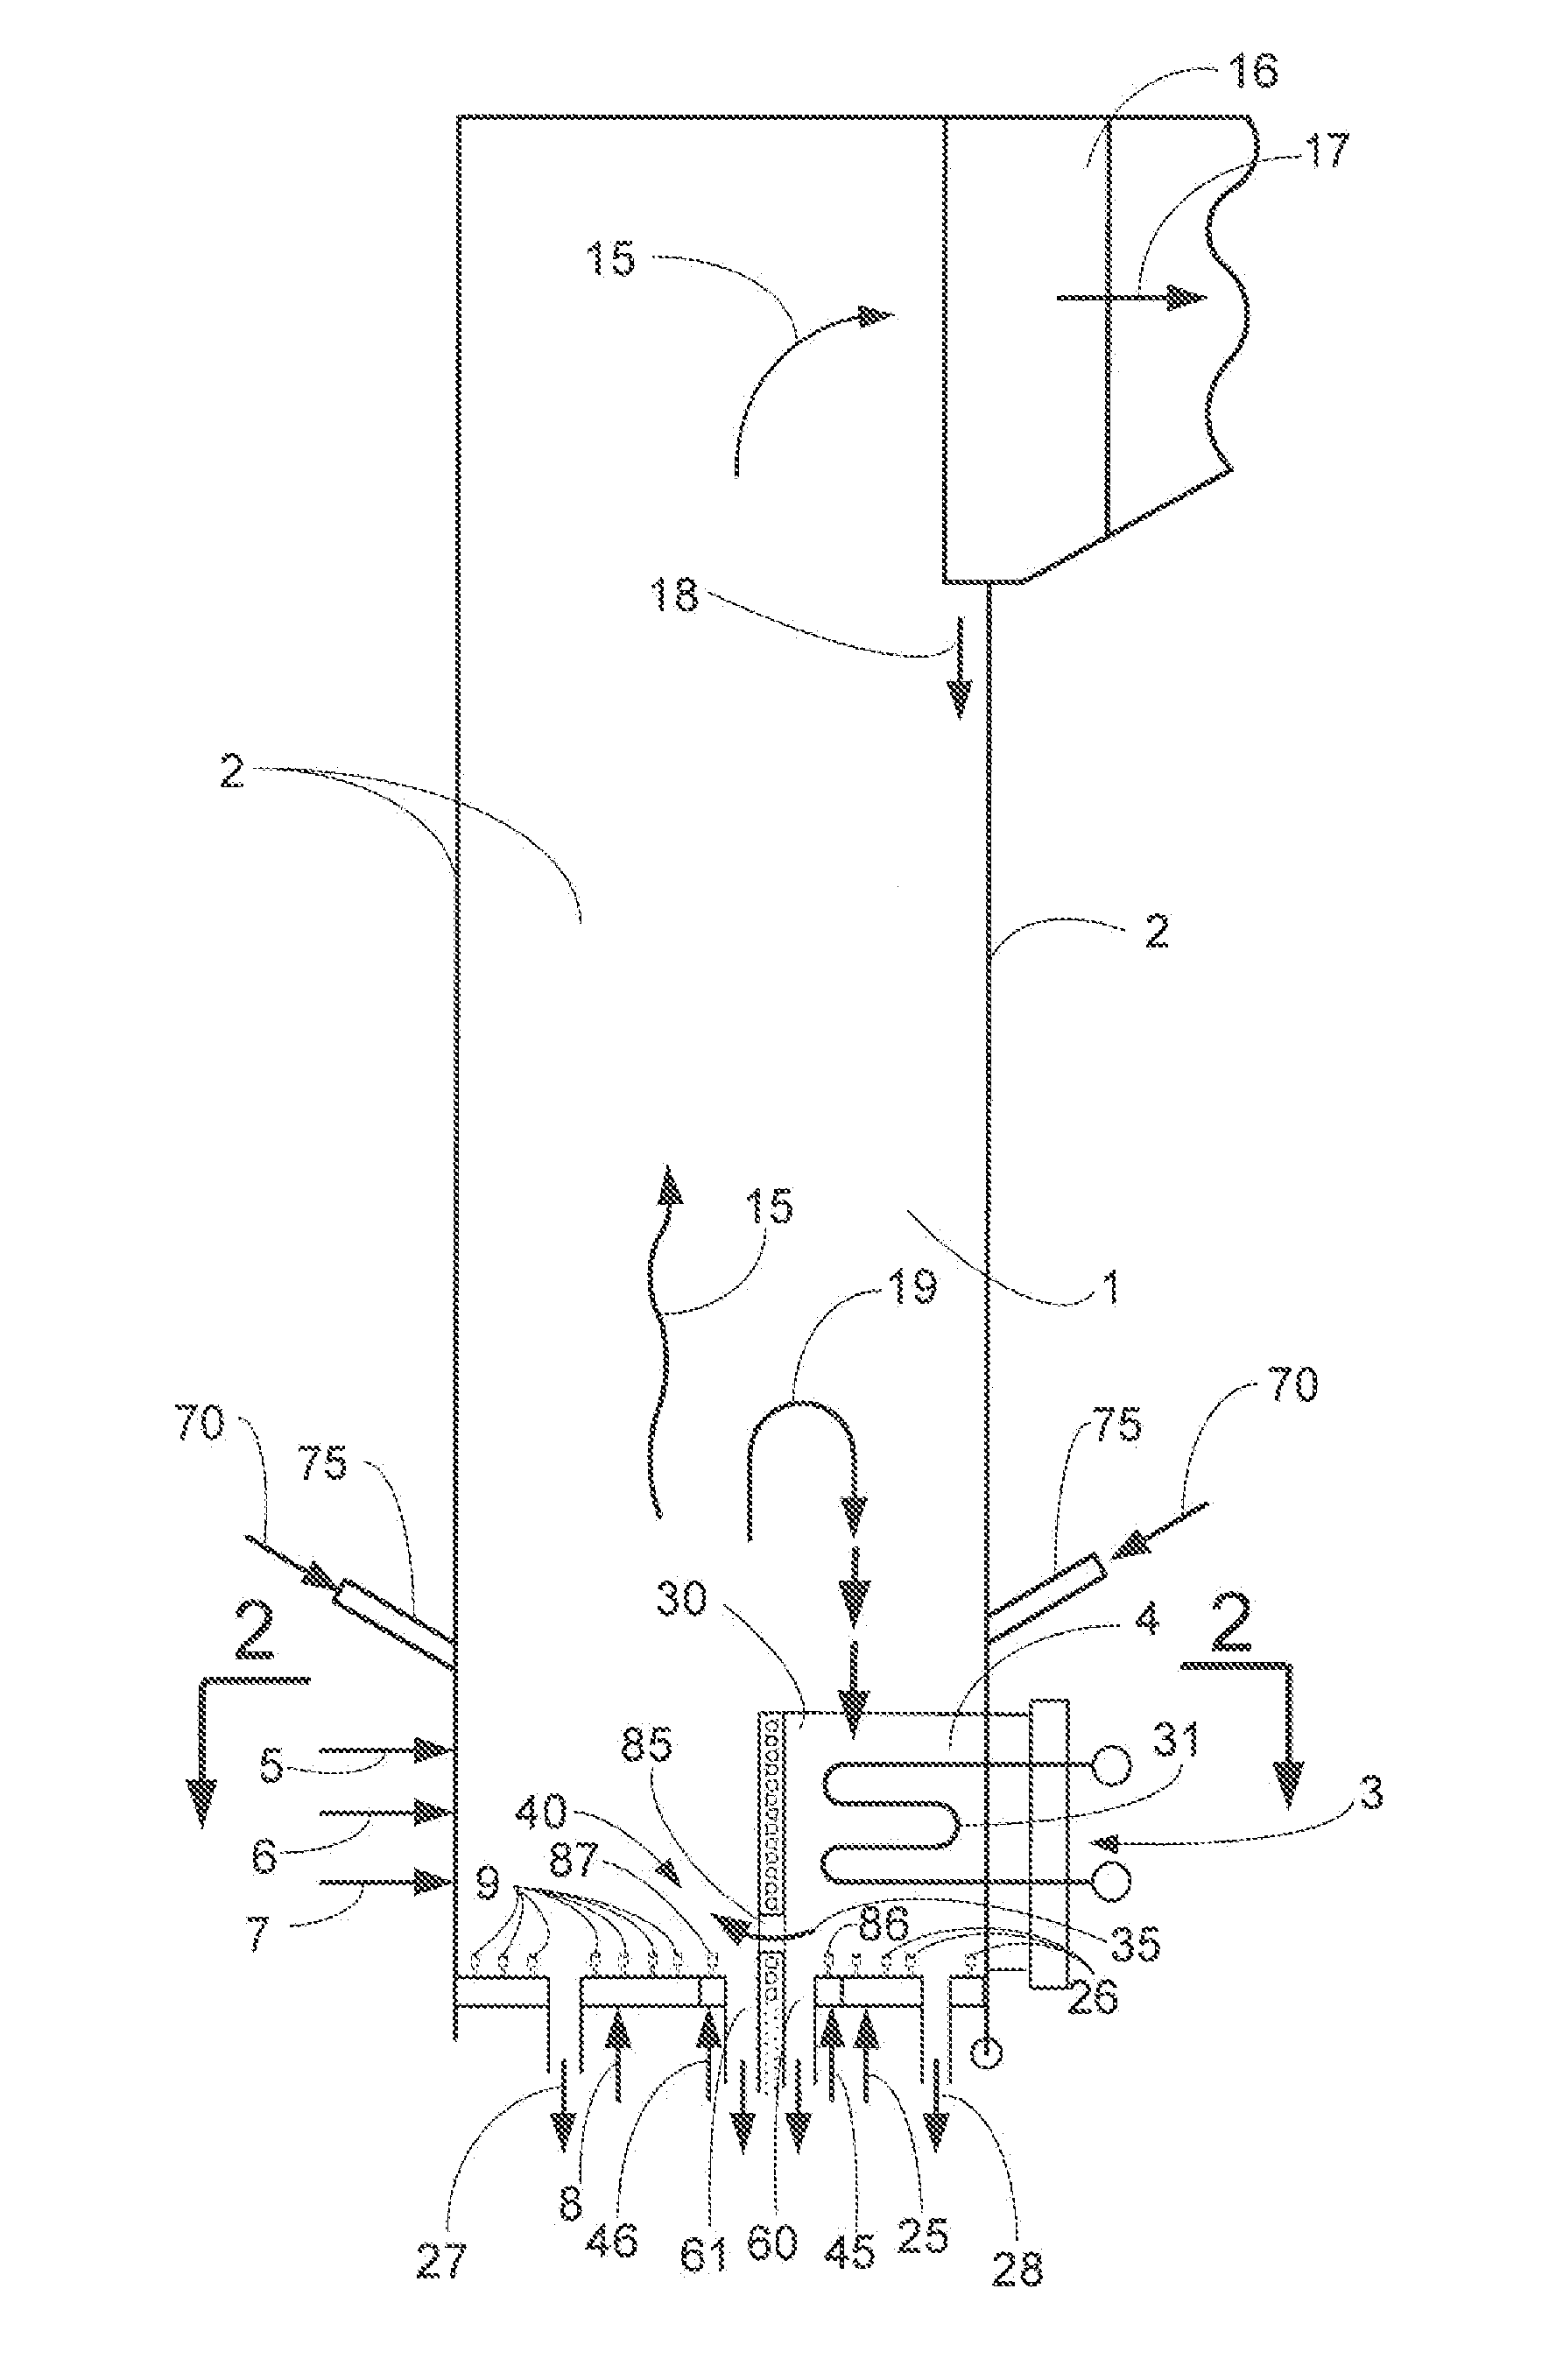 In-bed solids control valve with improved reliability